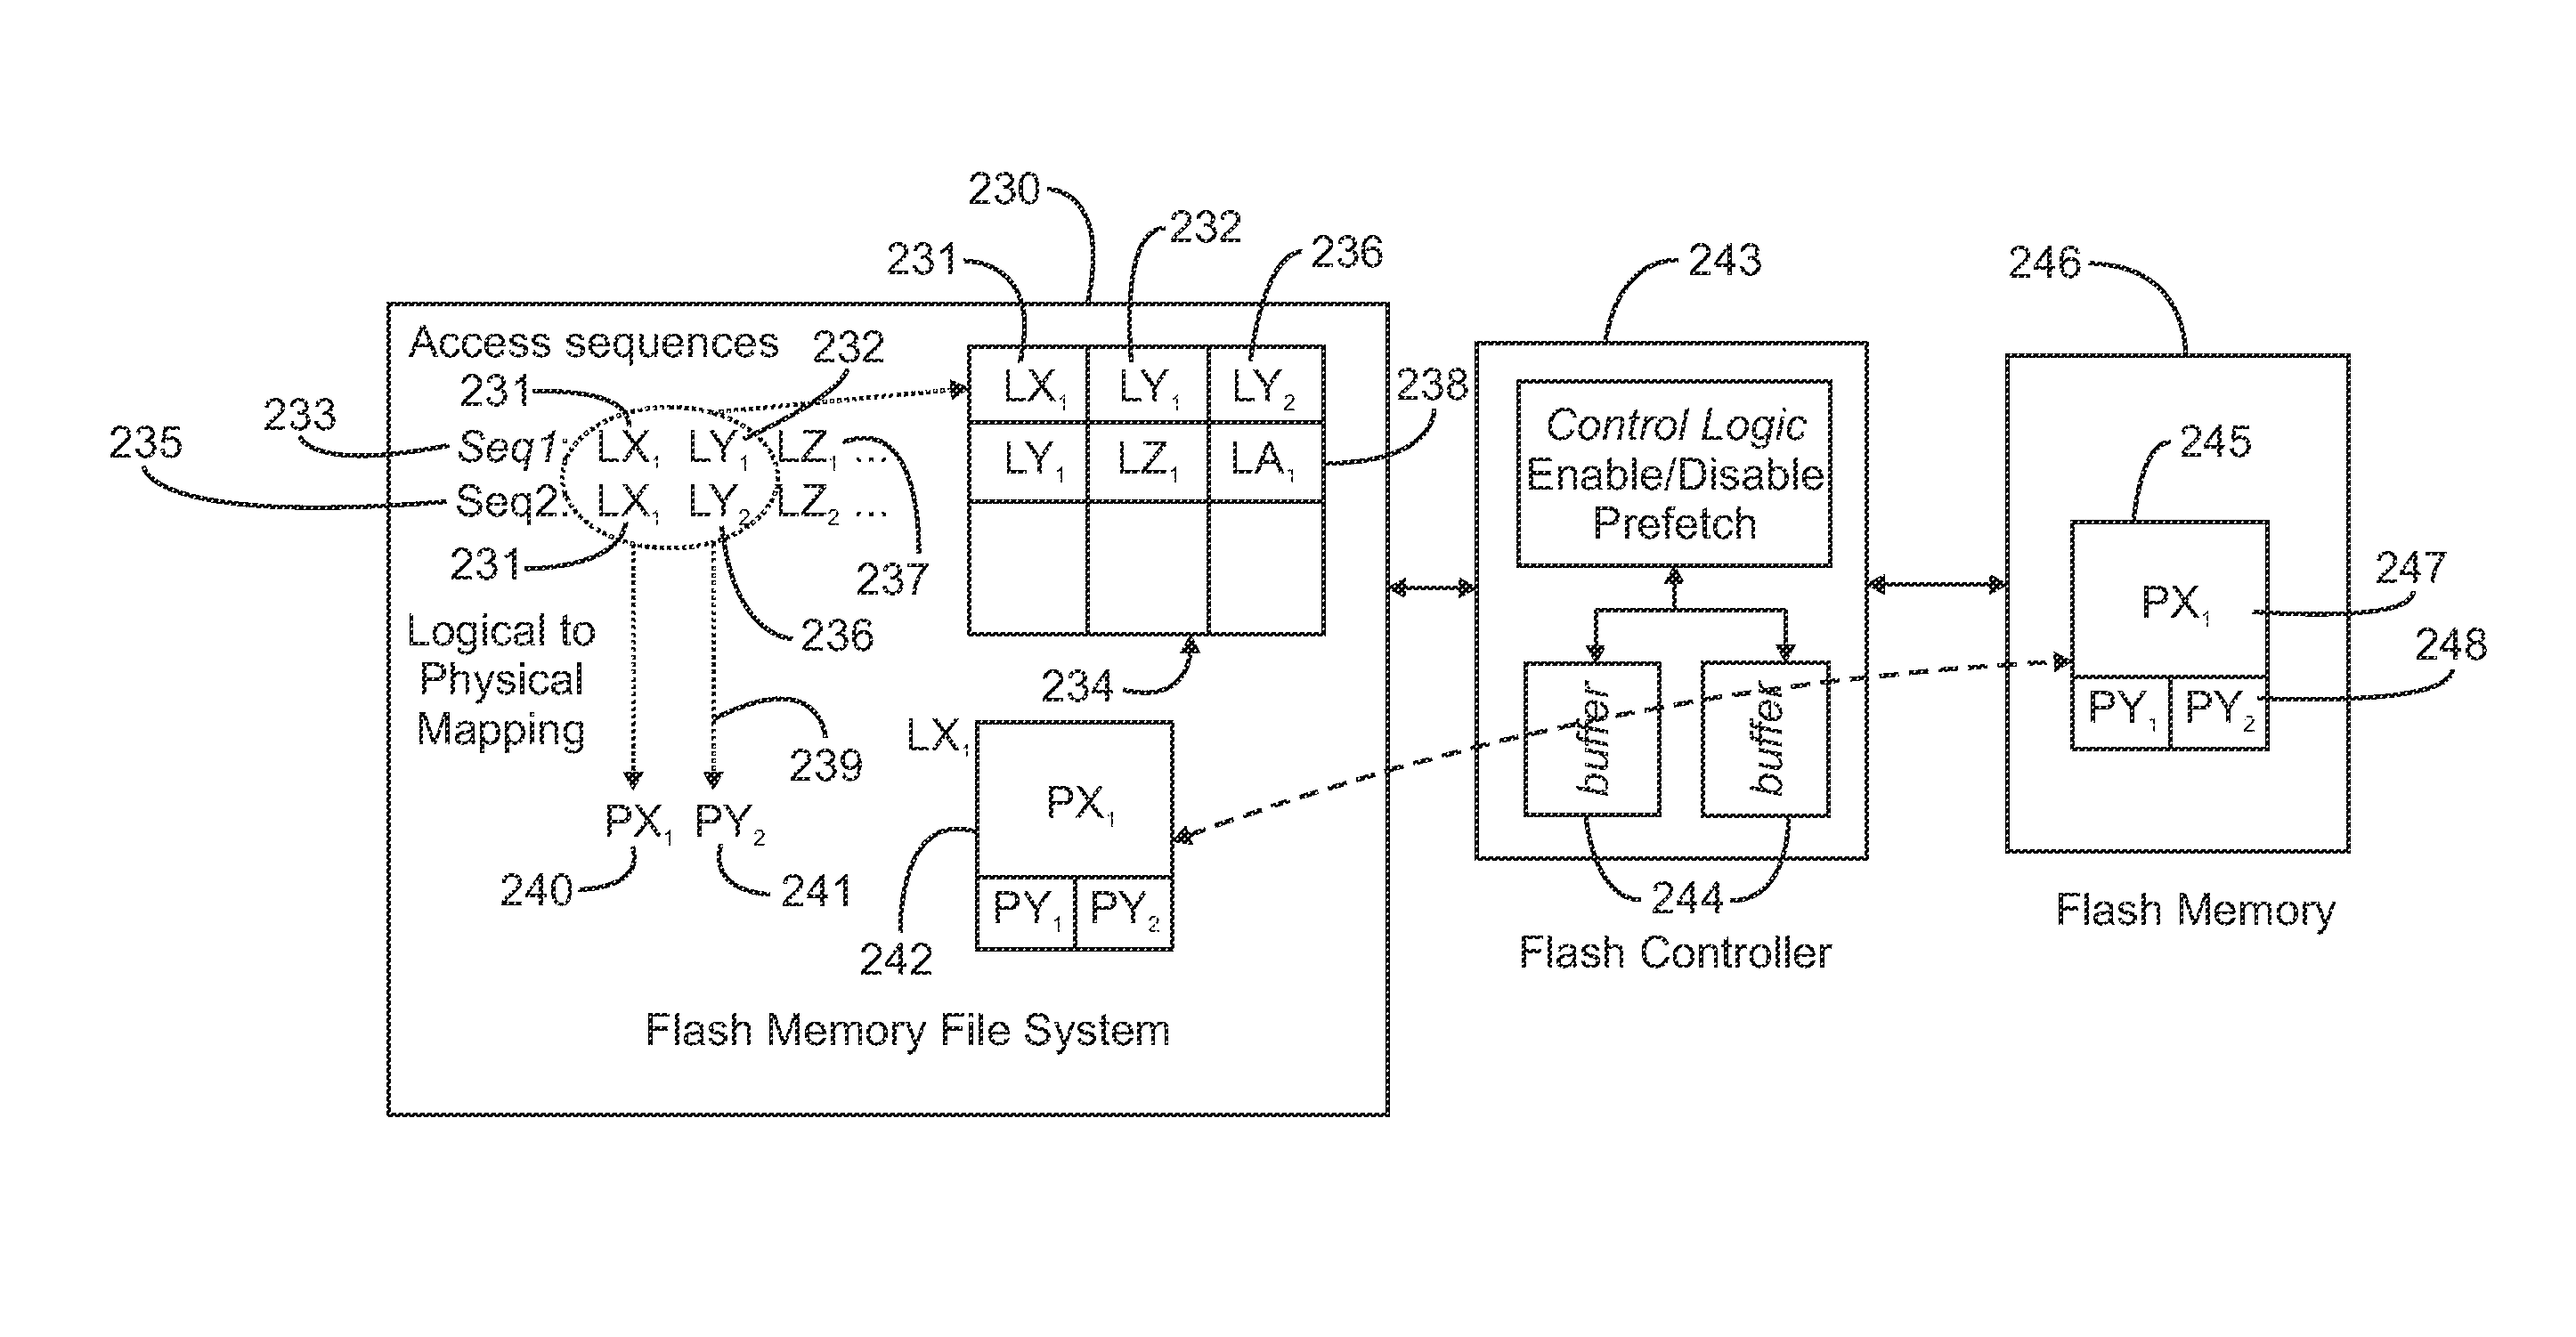 Storing multi-stream non-linear access patterns in a flash based file-system